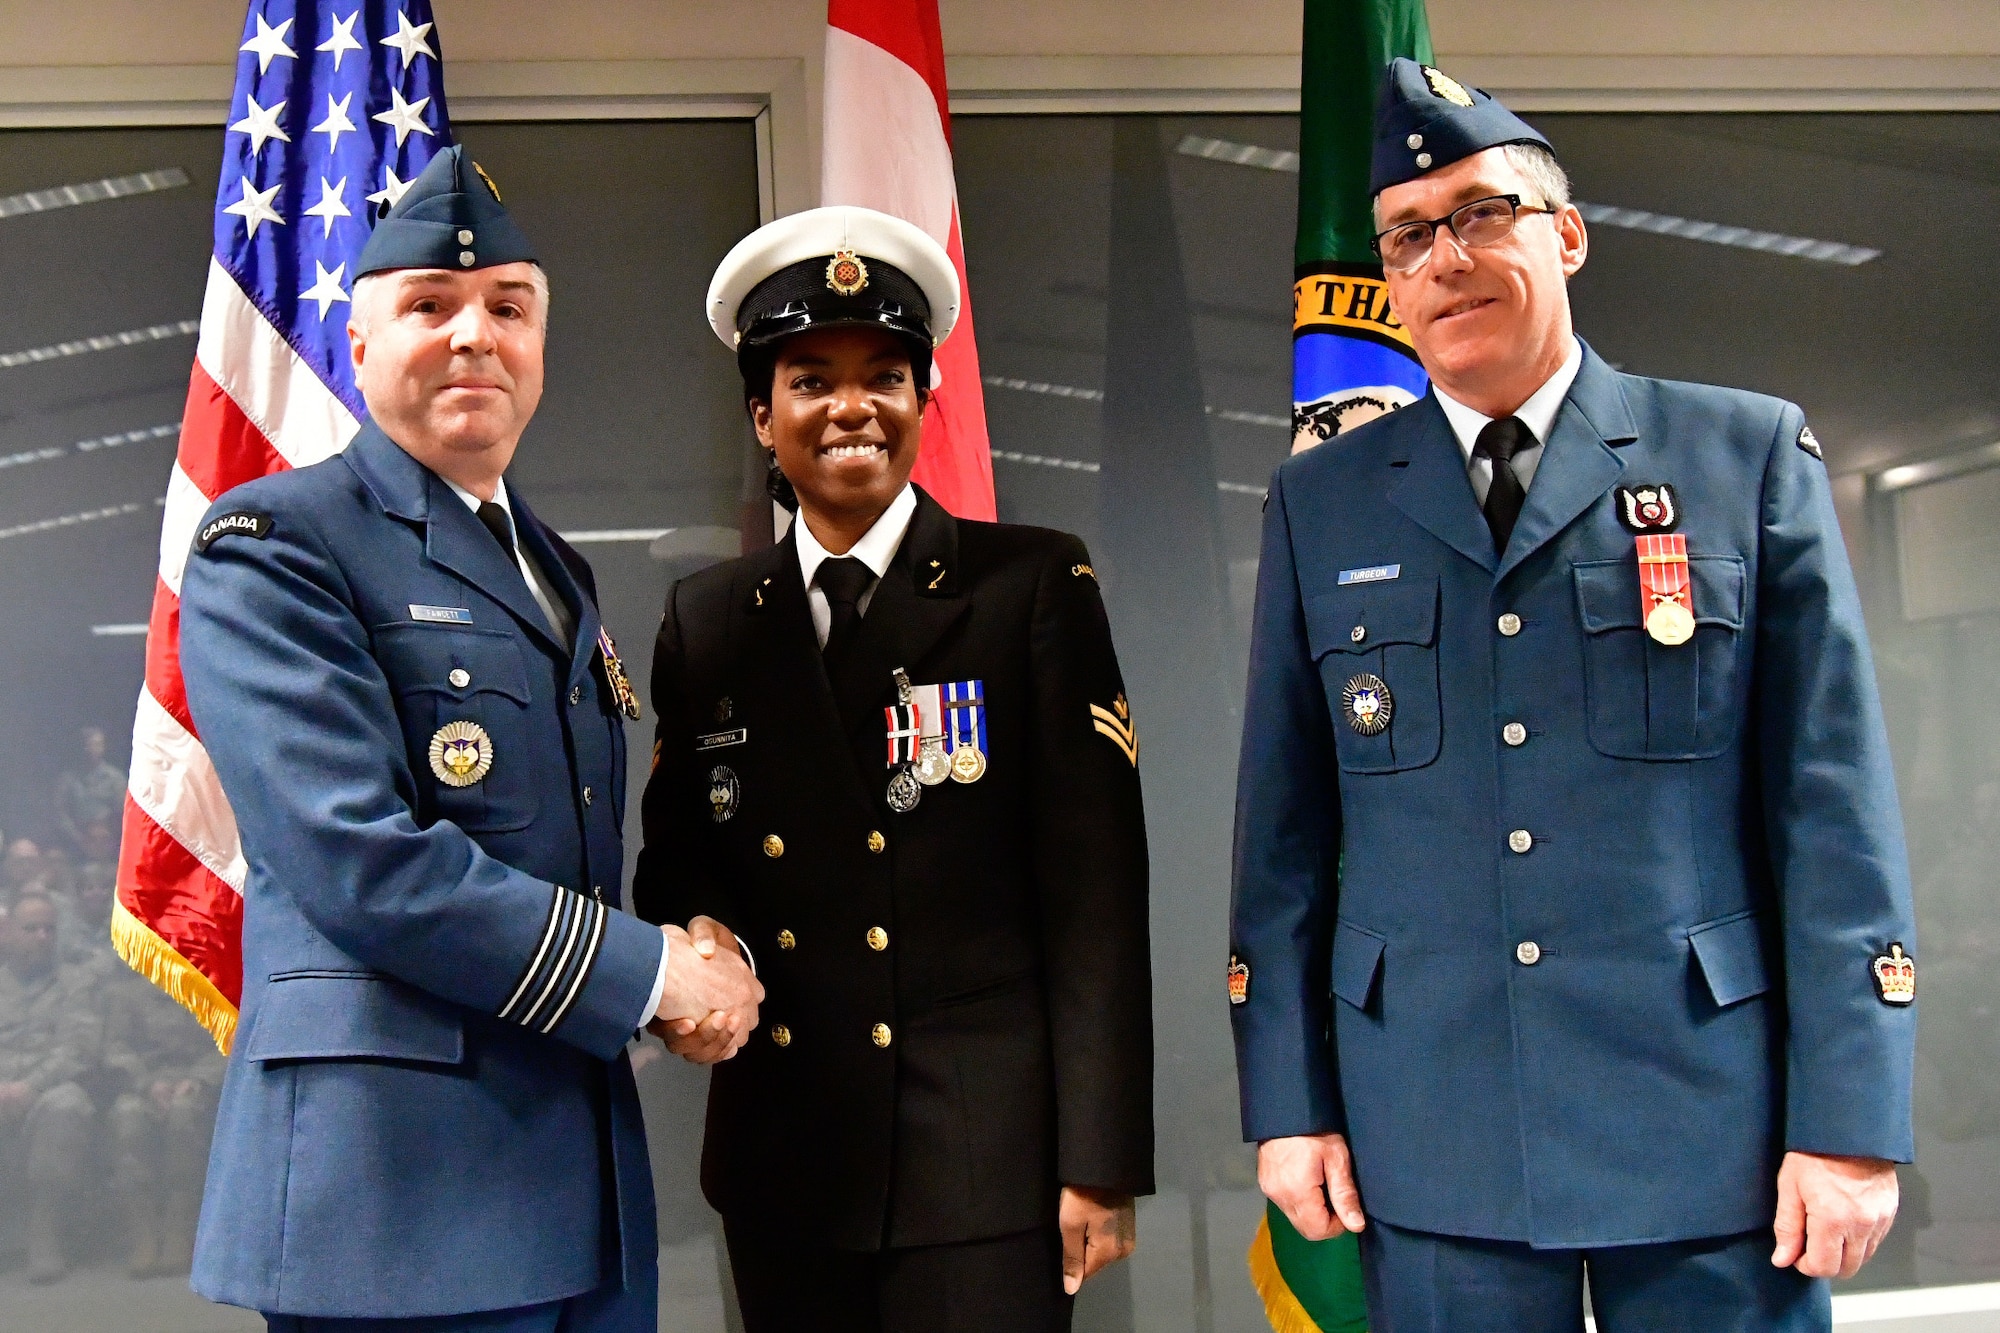 Royal Canadian Navy Master Seaman Malisa Ogunniya (center), Western Air Defense Sector Canadian Detachment chief clerk, is awarded the Canadian Armed Forces Special Service Medal with NATO bar from Lt. Col. Michael Fawcett, WADS Canadian Detachment commander (left), Dec. 1, 2018 at Joint Base Lewis-McChord, Washington.  The medal was awarded for Ogunniya’s exceptional service in support of operations while onboard Her Majesty’s Canadian Ship Winnipeg from July 2015 through January 2016.  HMCS Winnipeg conducted operations under the standing NATO Maritime Group Two as part of Operation Reassurance, NATO’s mission to build maritime situational awareness in order to detect, deter and disrupt terrorism in the Mediterranean Sea. The Special Service Medal was created to recognize members of the Canadian Armed Forces who have performed a service determined to be under exceptional circumstances, in a clearly defined locality for a specified duration.  The SSM is always issued with a bar that specifies the special service being recognized, each bar having its own criteria. (U.S. Air National Guard photo by Maj. Kimberly D. Burke)